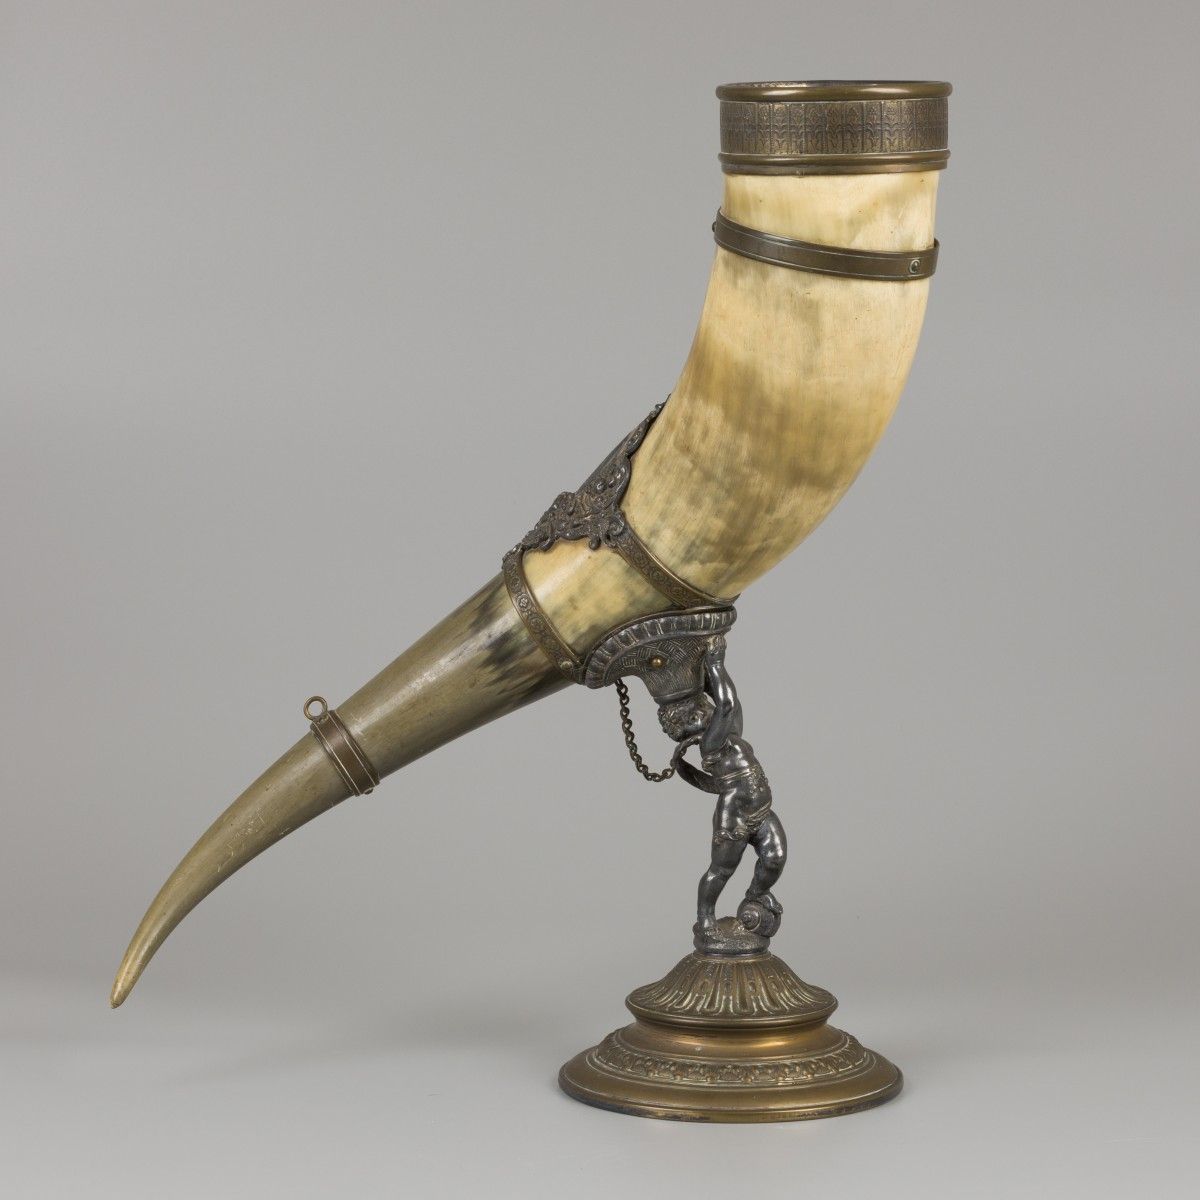 A drinking horn made of an ox horn, carried by a putto, ca. 1920. Estimación: 70&hellip;